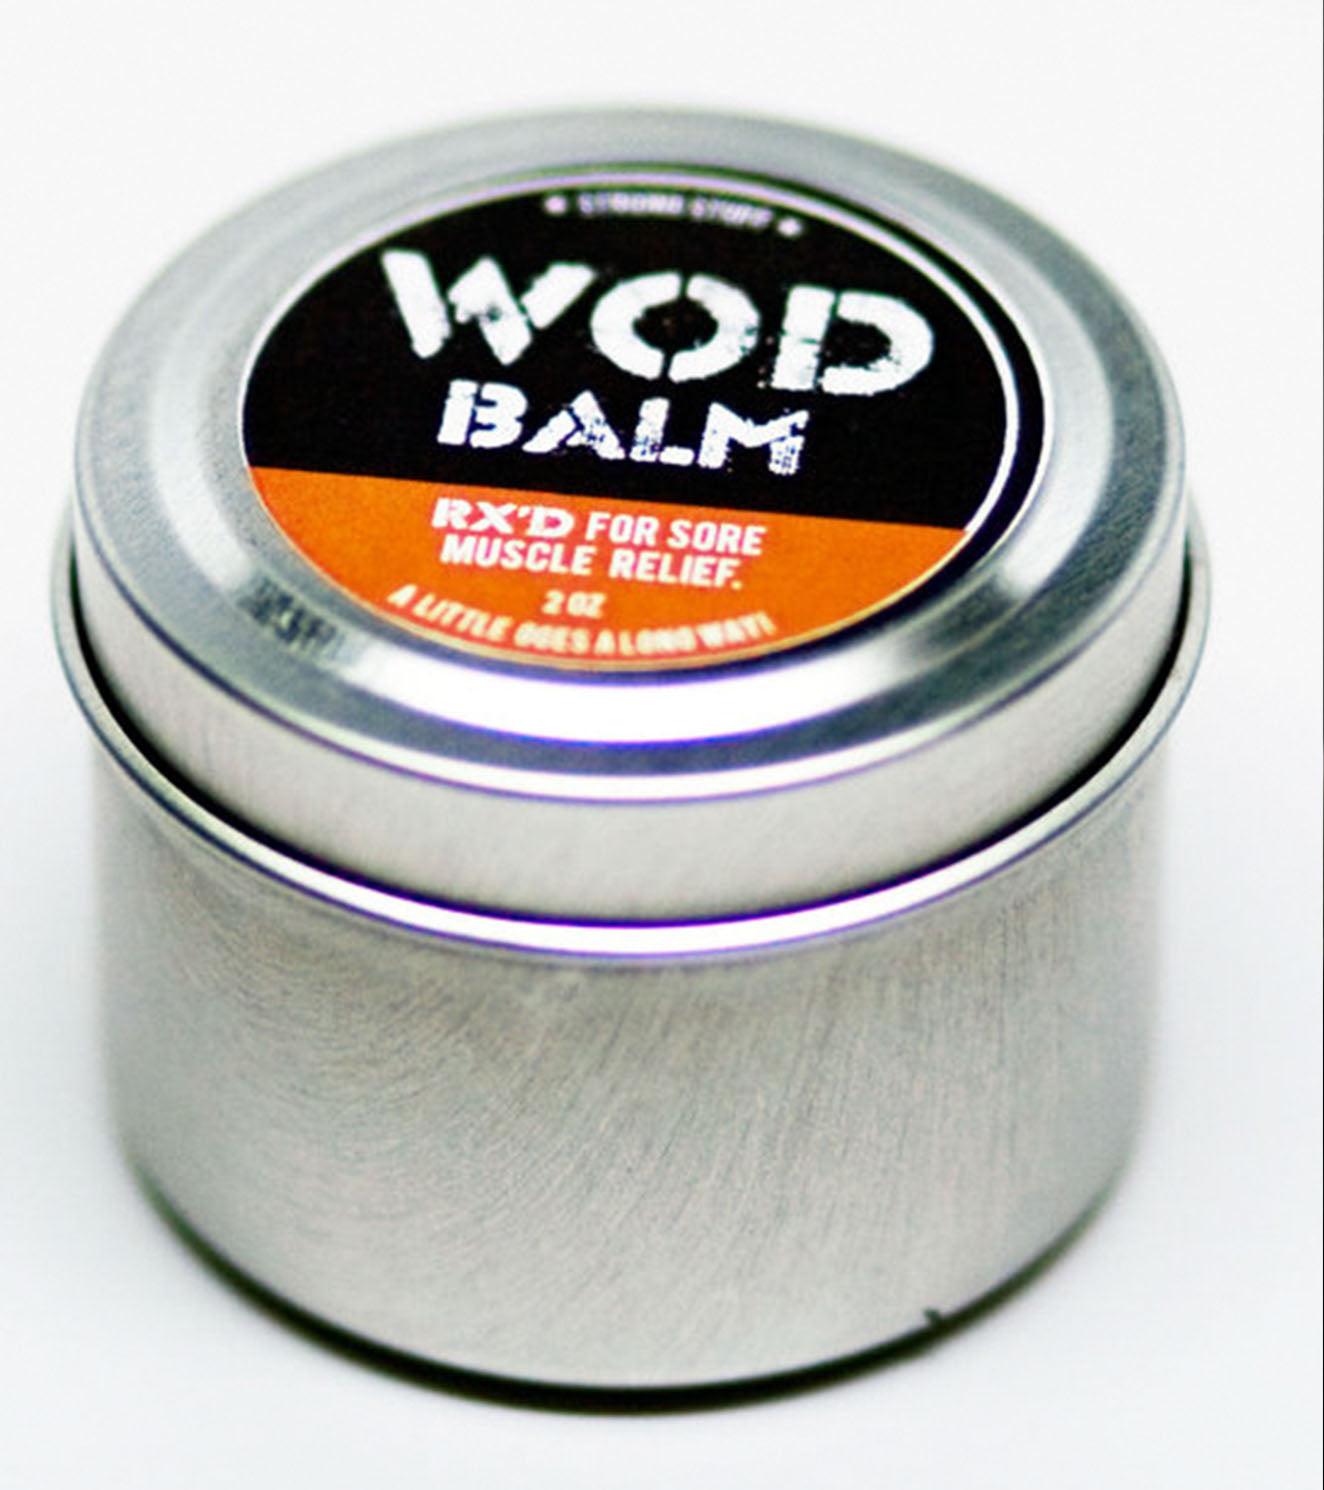 WOD Balm ( Rx'd for sore muscle Relief) - wodarmour